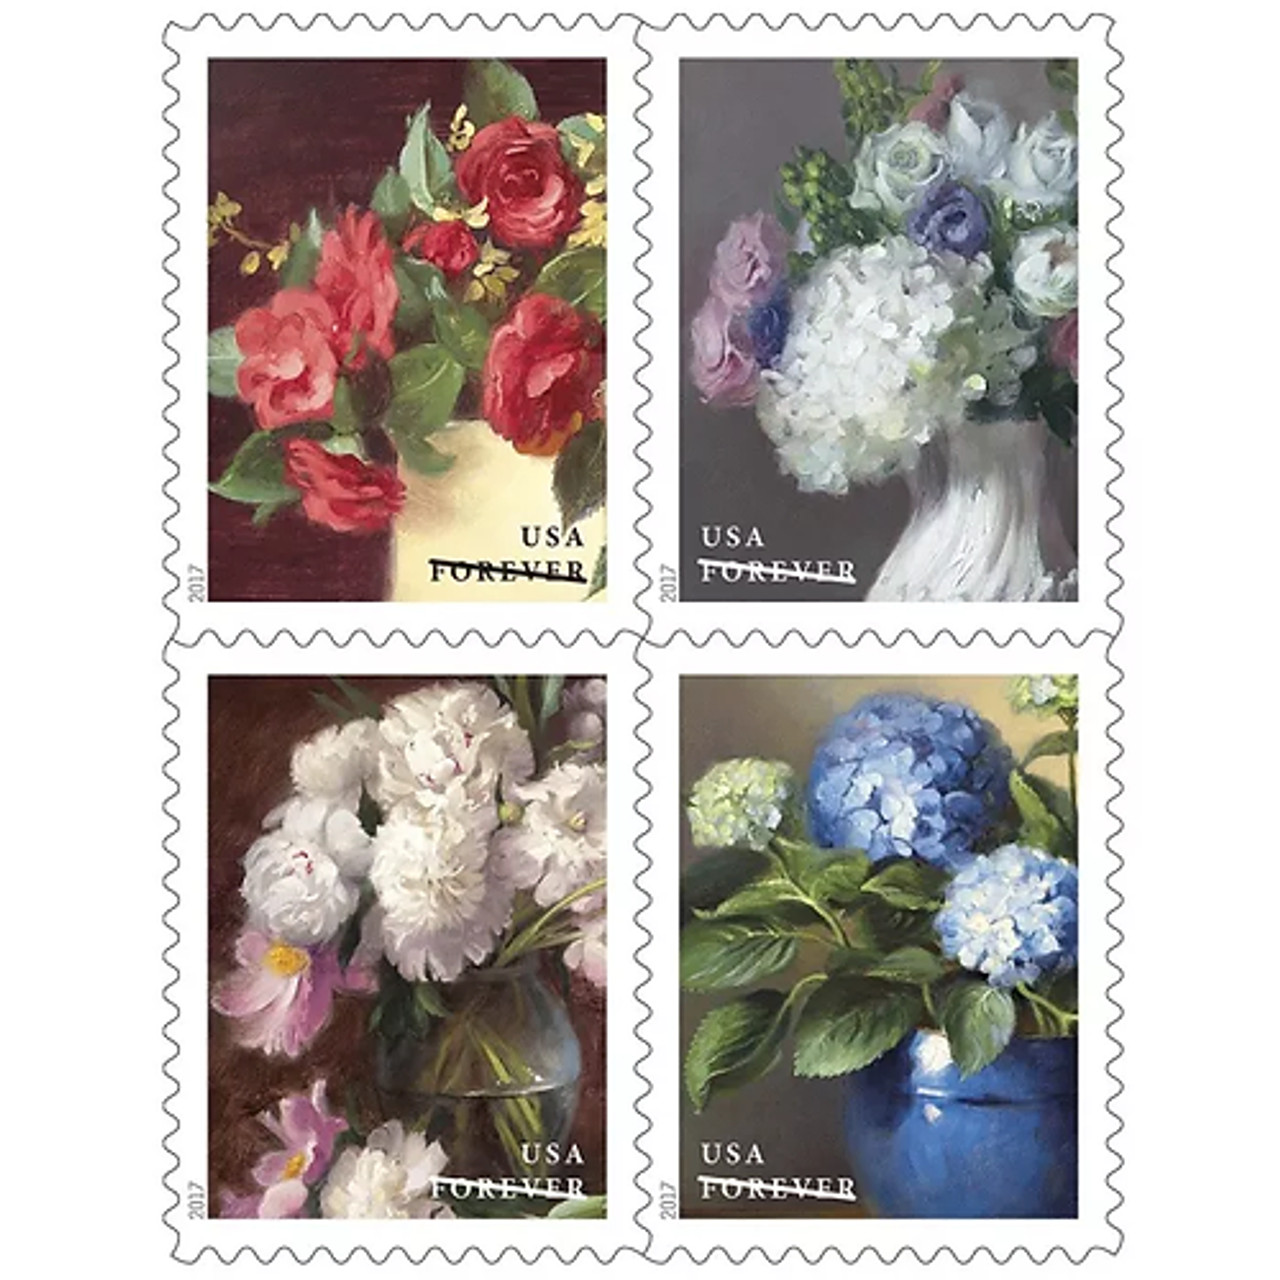 2017 Flowers From The Garden Forever First Class Postage Stamps